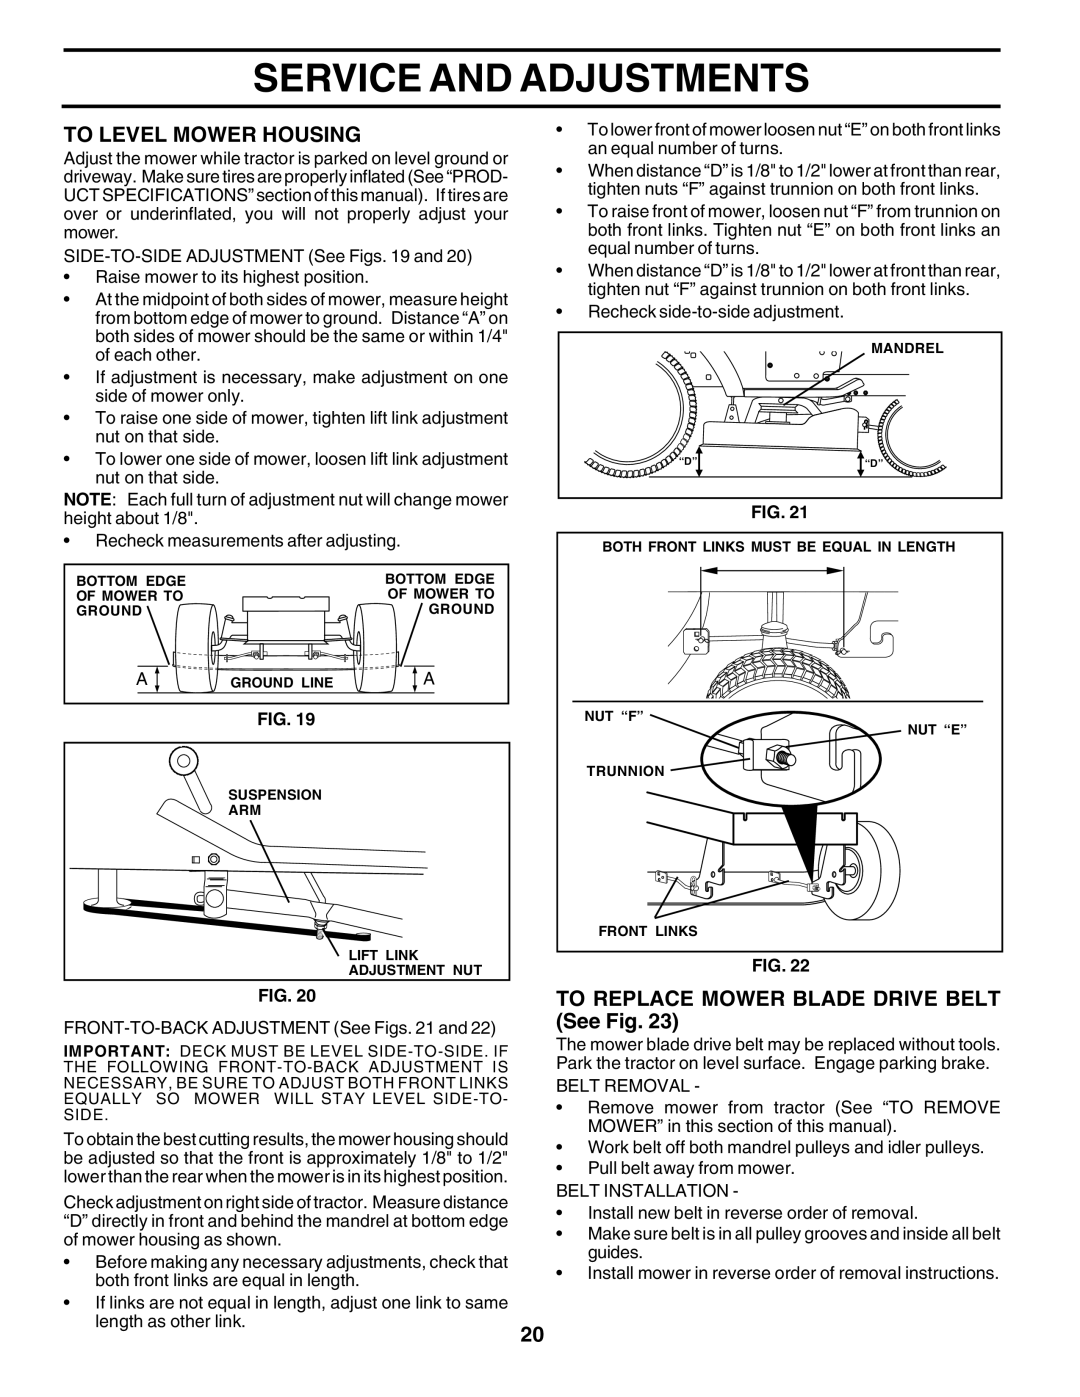 Poulan 181347 owner manual To Level Mower Housing, TO REPLACE MOWER BLADE DRIVE BELT See Fig, Service And Adjustments 